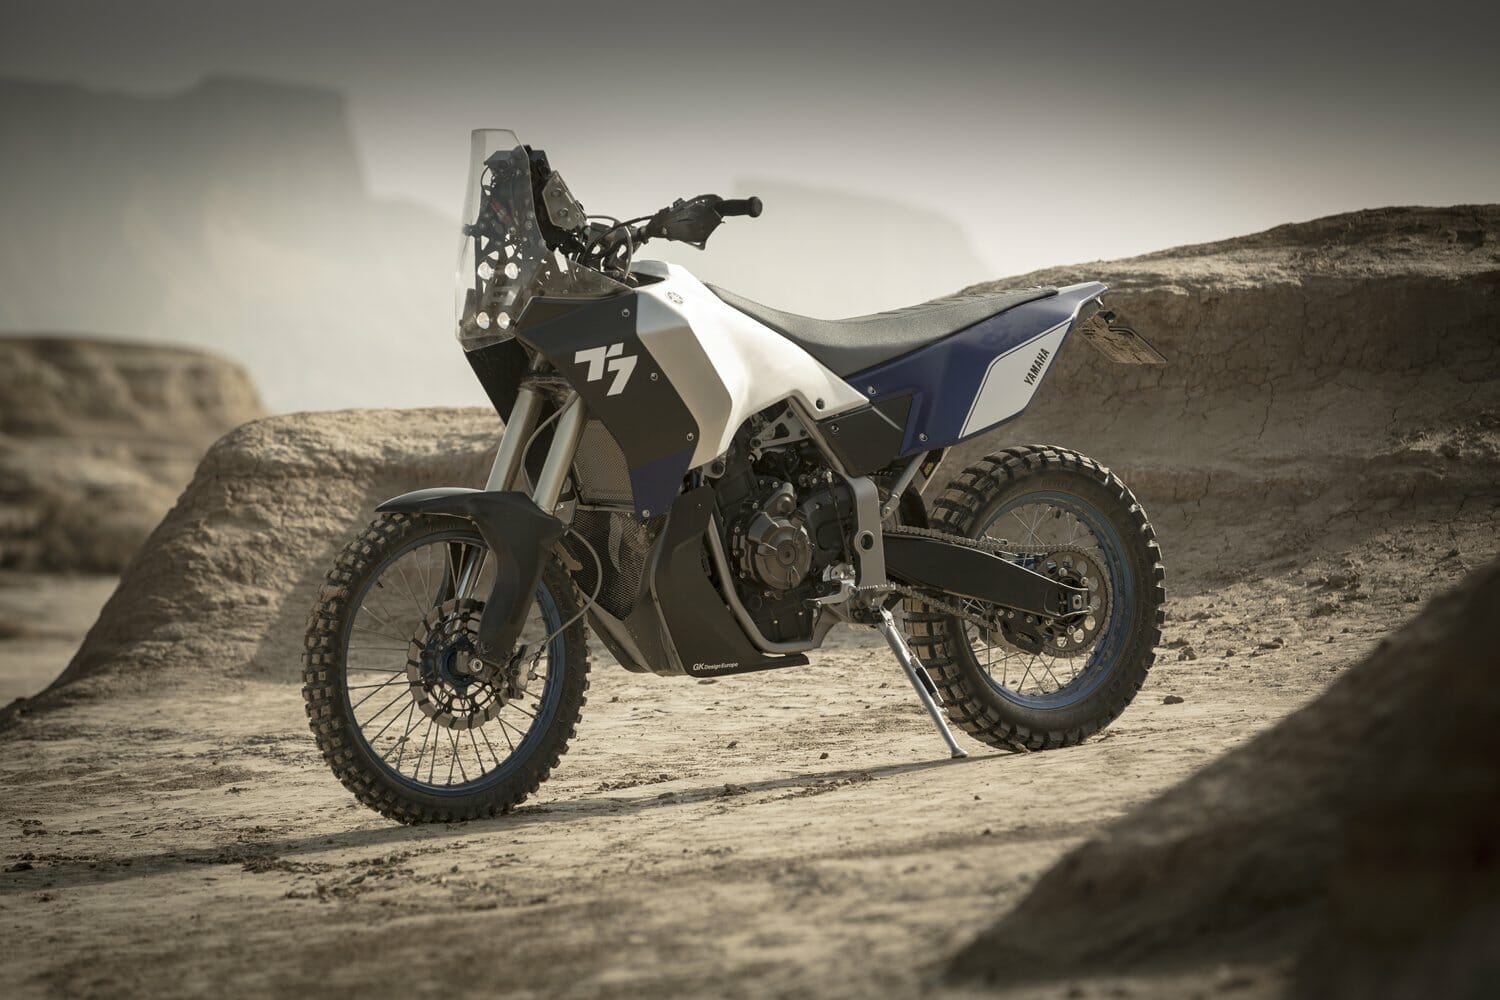 Yamaha T7 Concept – Pictures